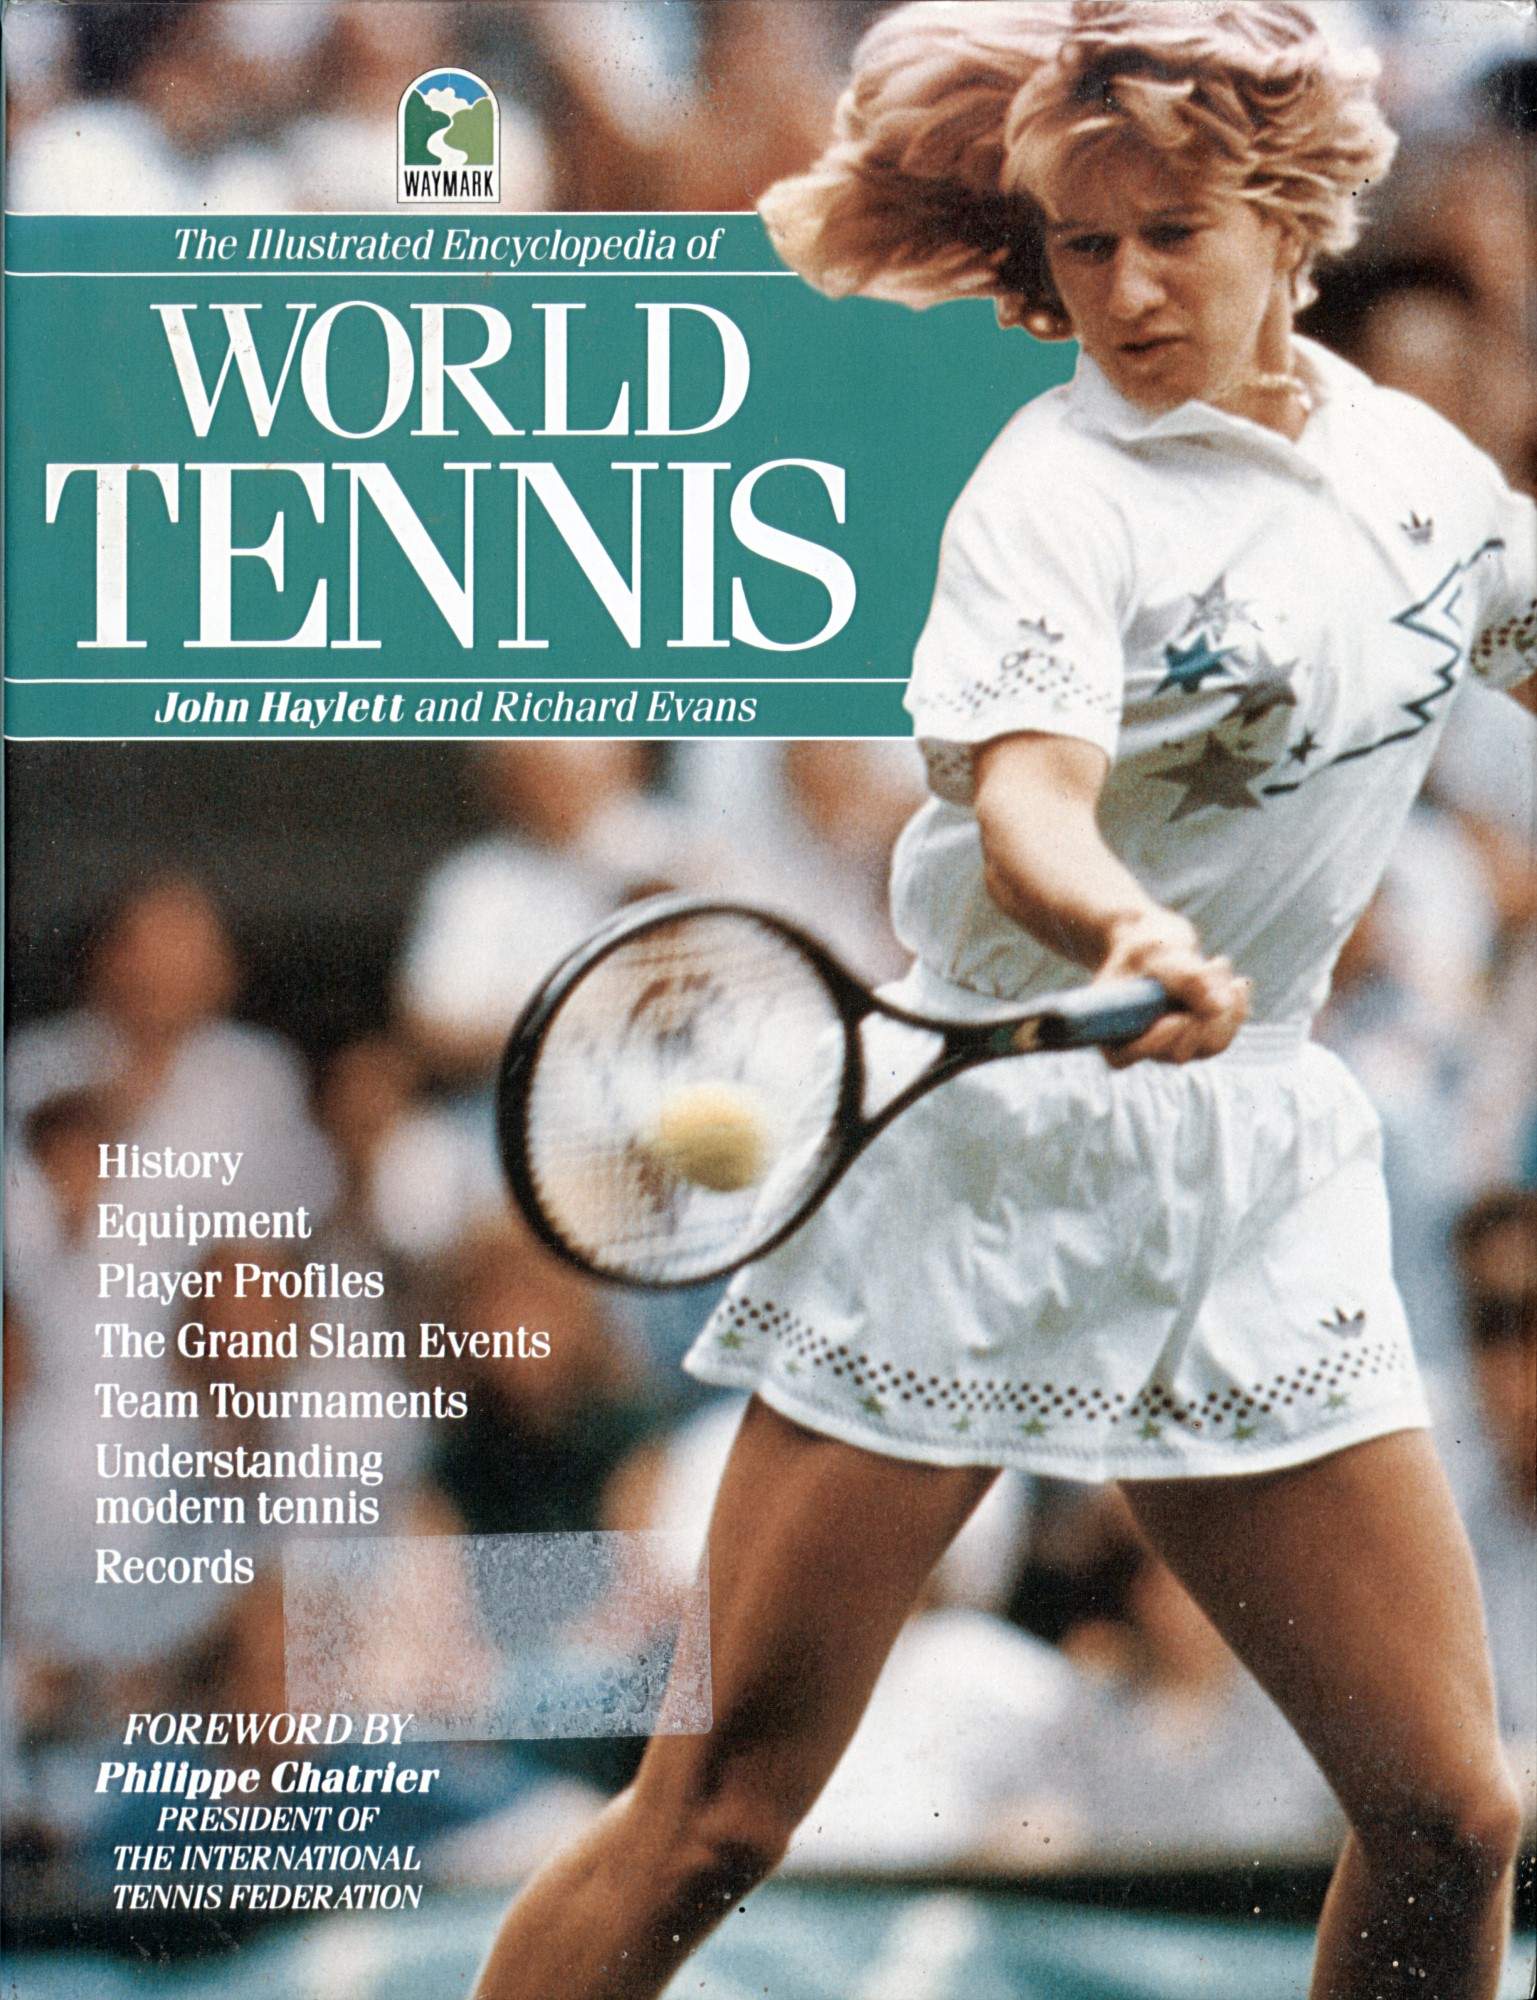 The Illustrated Encyclopedia of World Tennis